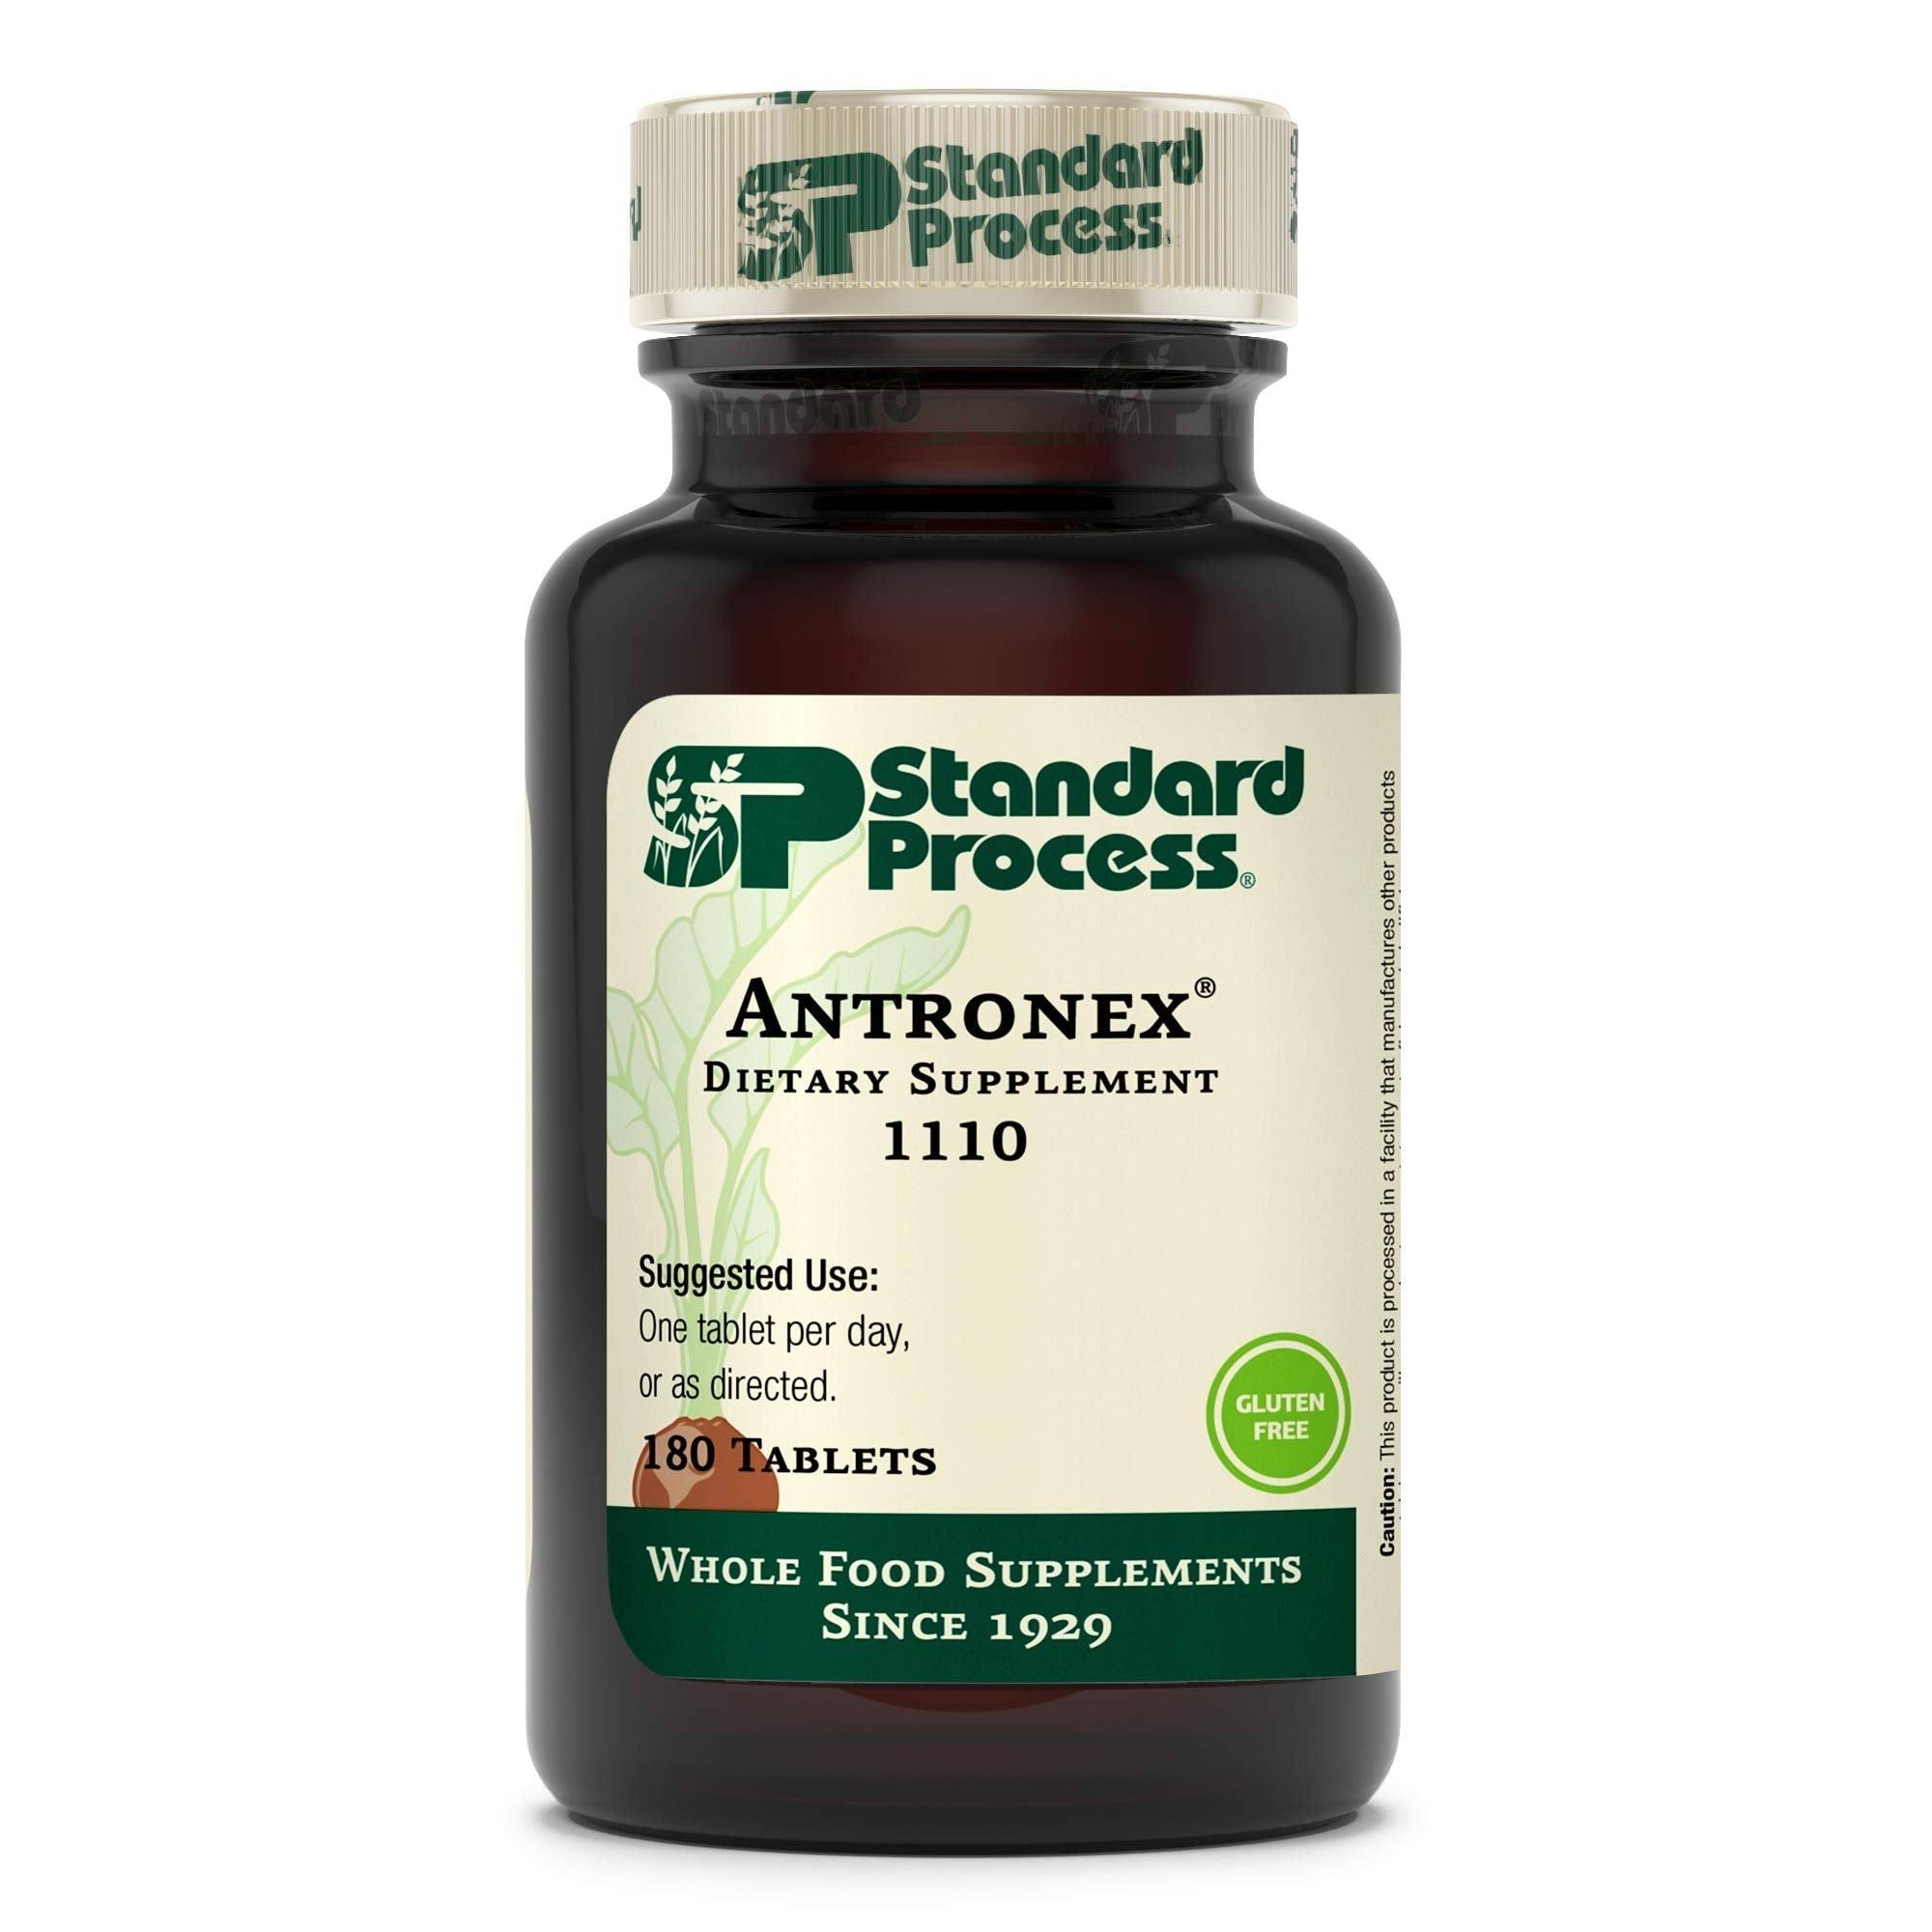 Standard Process Antronex - Whole Food Immune System Support and Liver Health Supplement With Calcium - 180 Tablets 180 Count (Pack of 1)